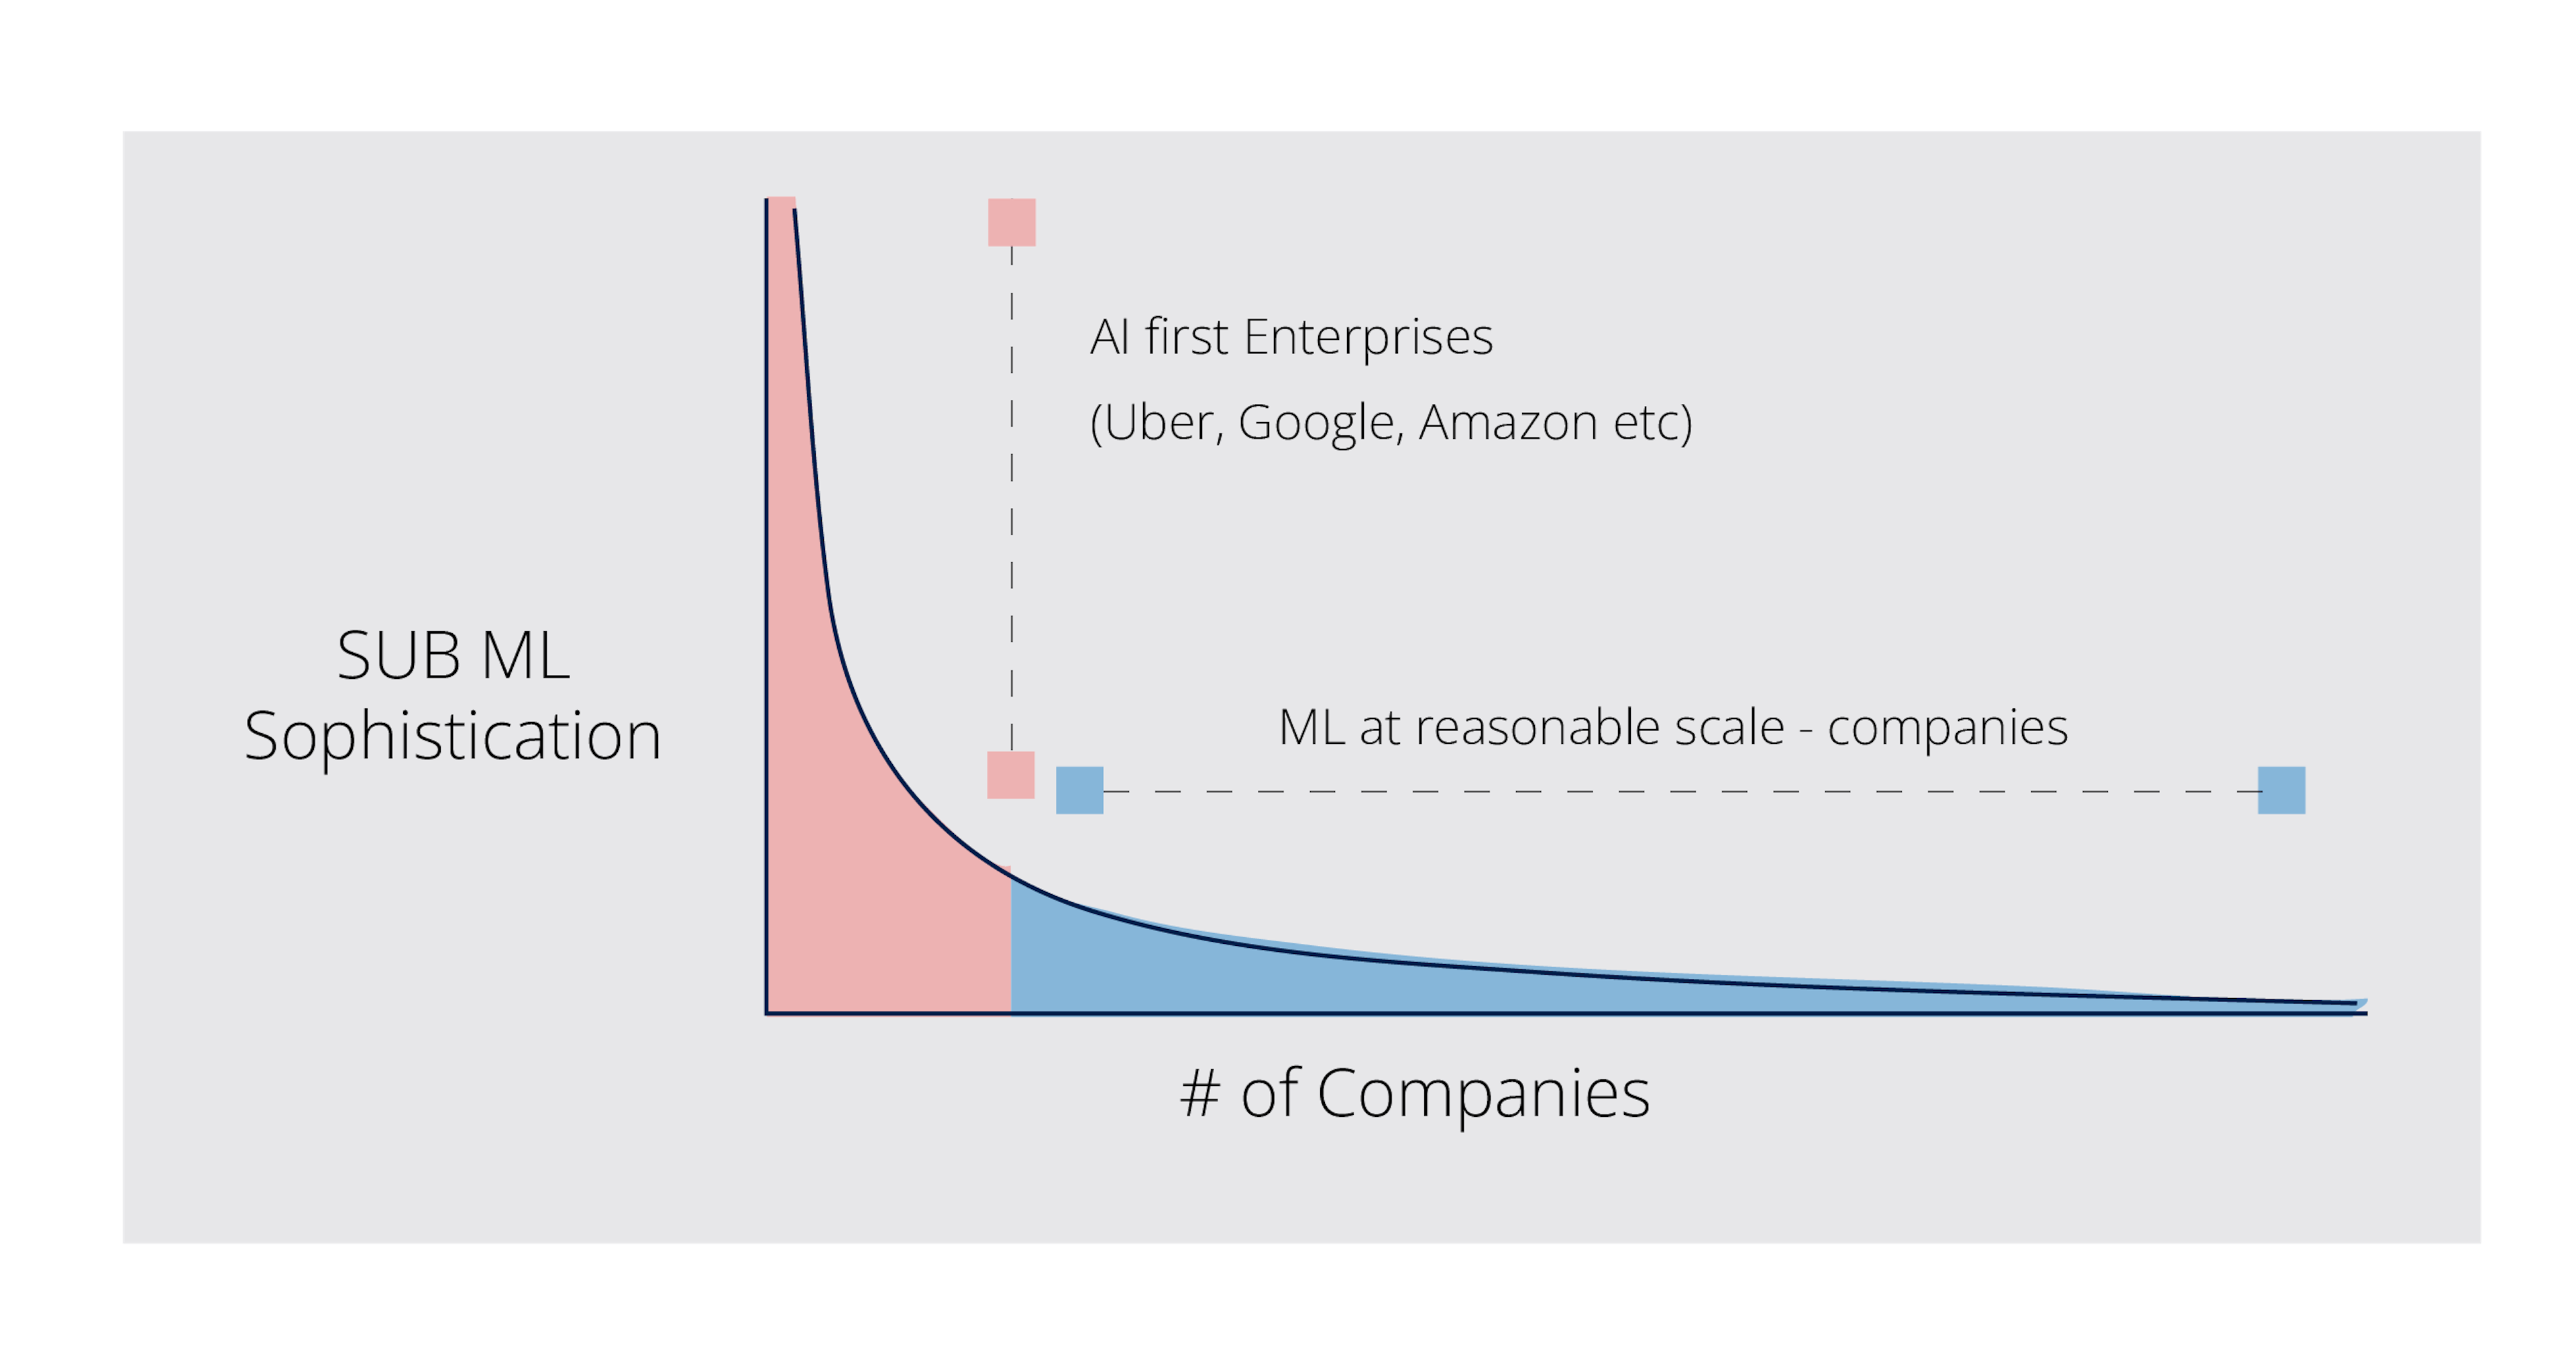 Long-tail distribution of “ML at reasonable scale” companies (Source: Mihail Eric)